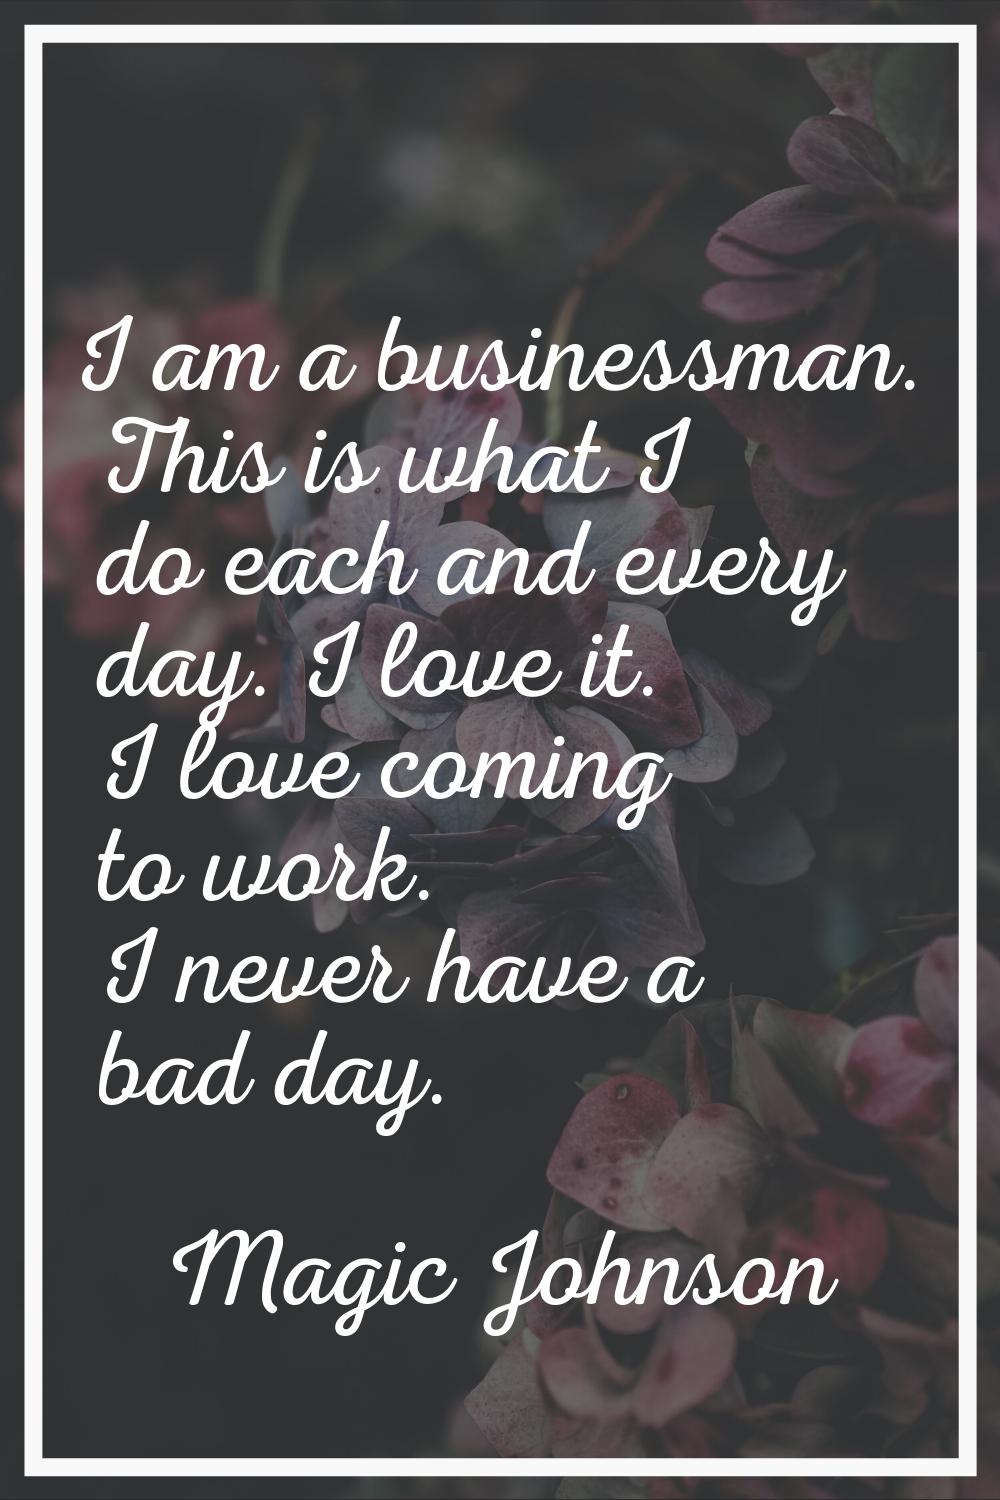 I am a businessman. This is what I do each and every day. I love it. I love coming to work. I never